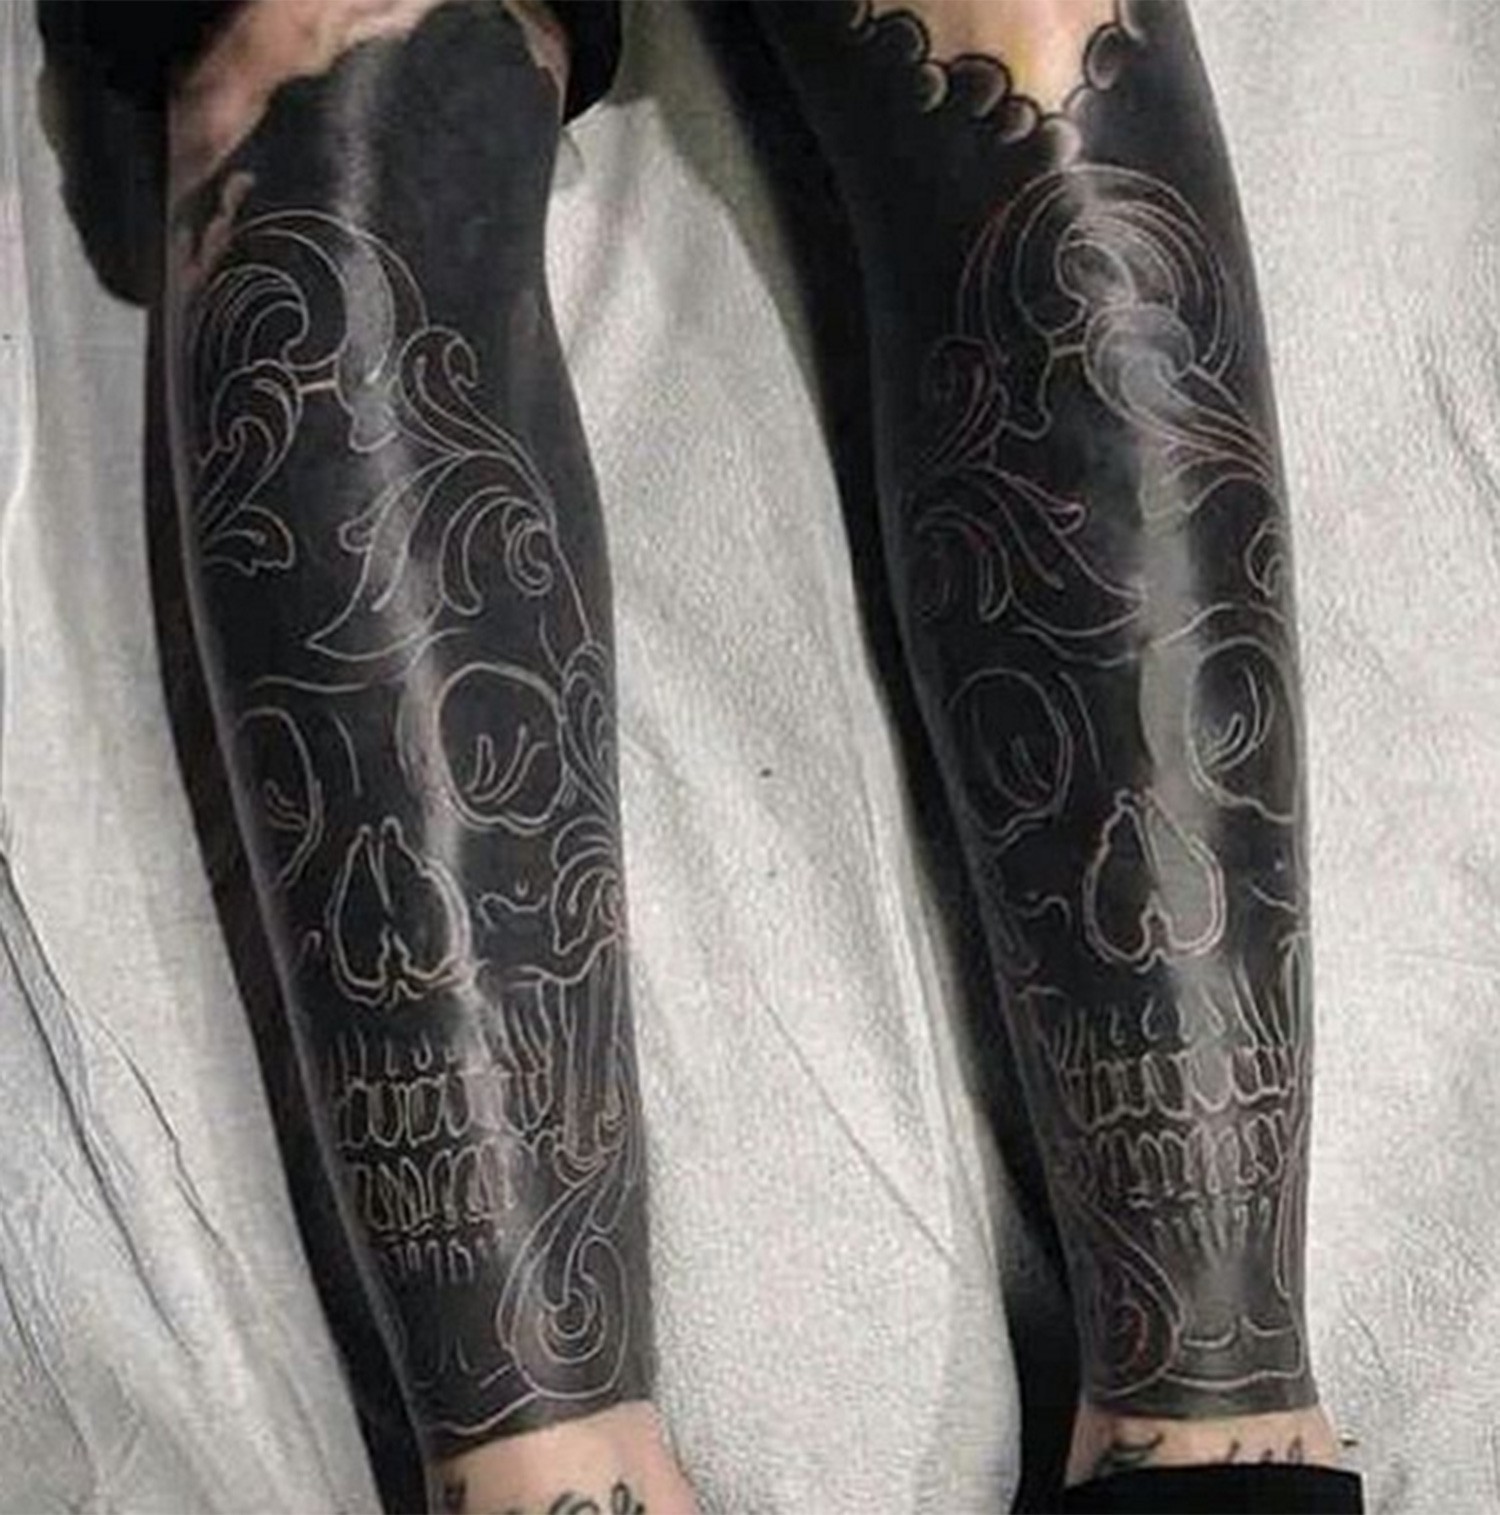 Blackout Tattoo Style by the Artist Jeanmarco in Texas